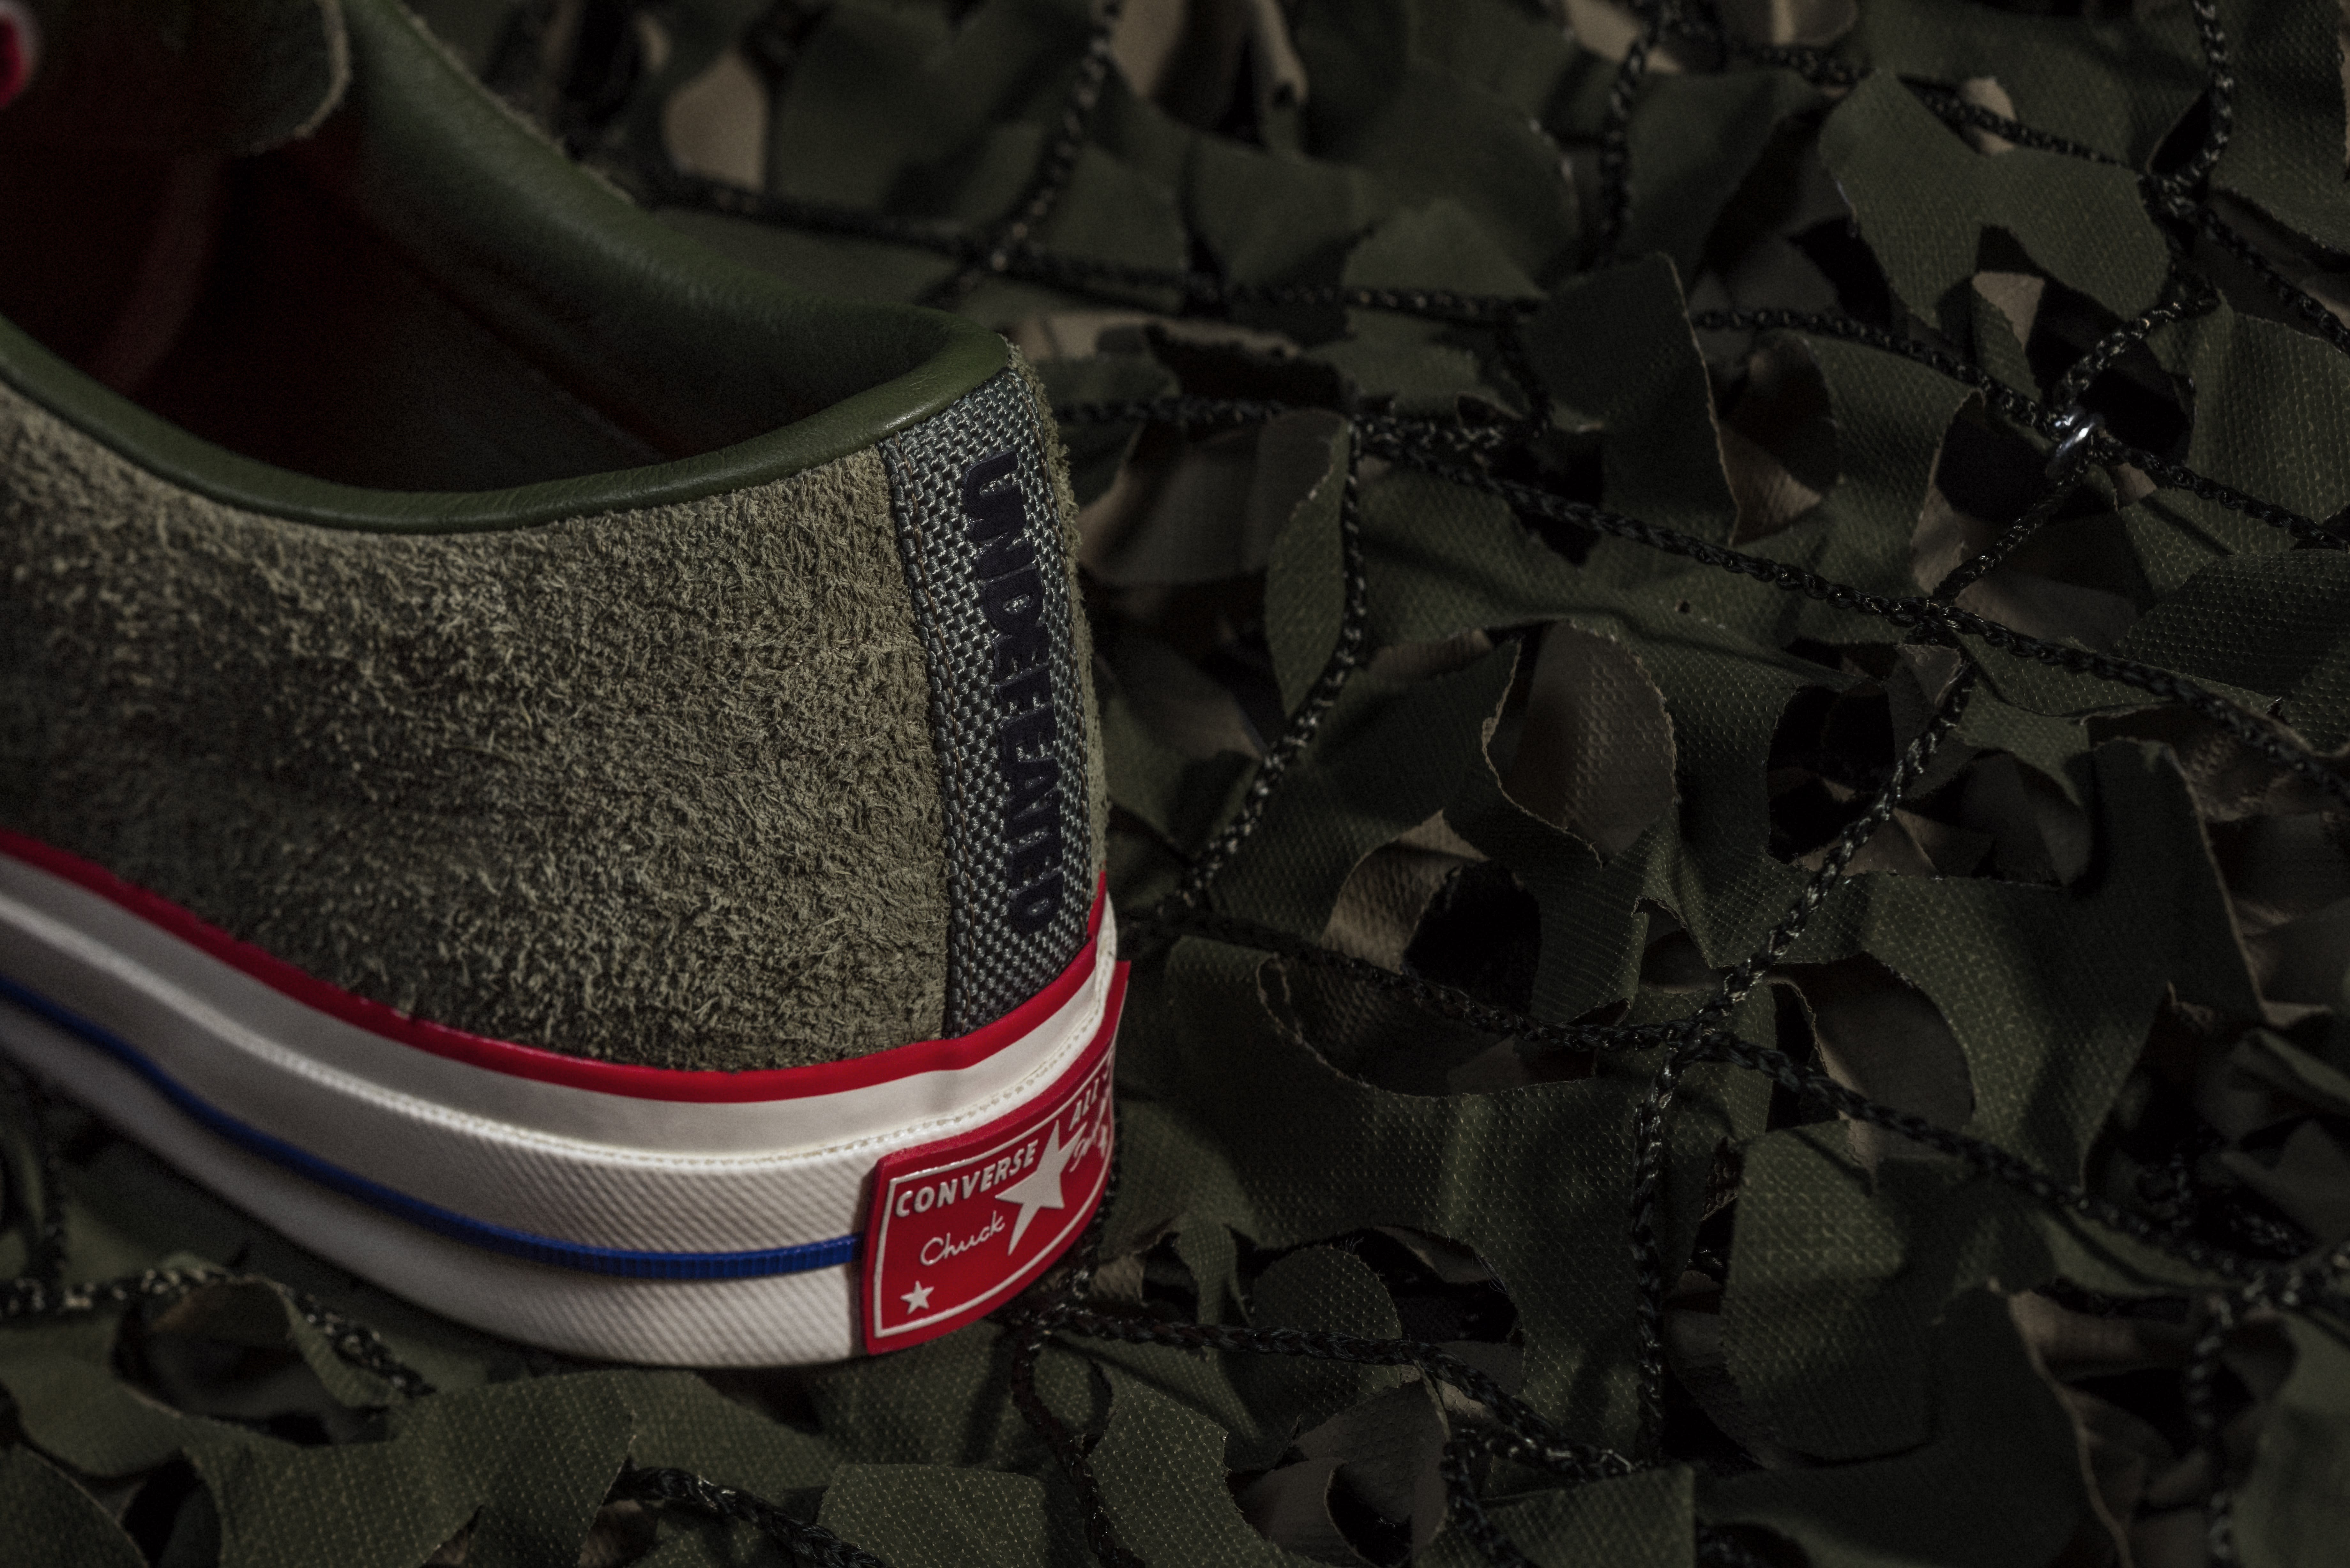 Converse’s And Undeafeated Collaborate On One Star Collection